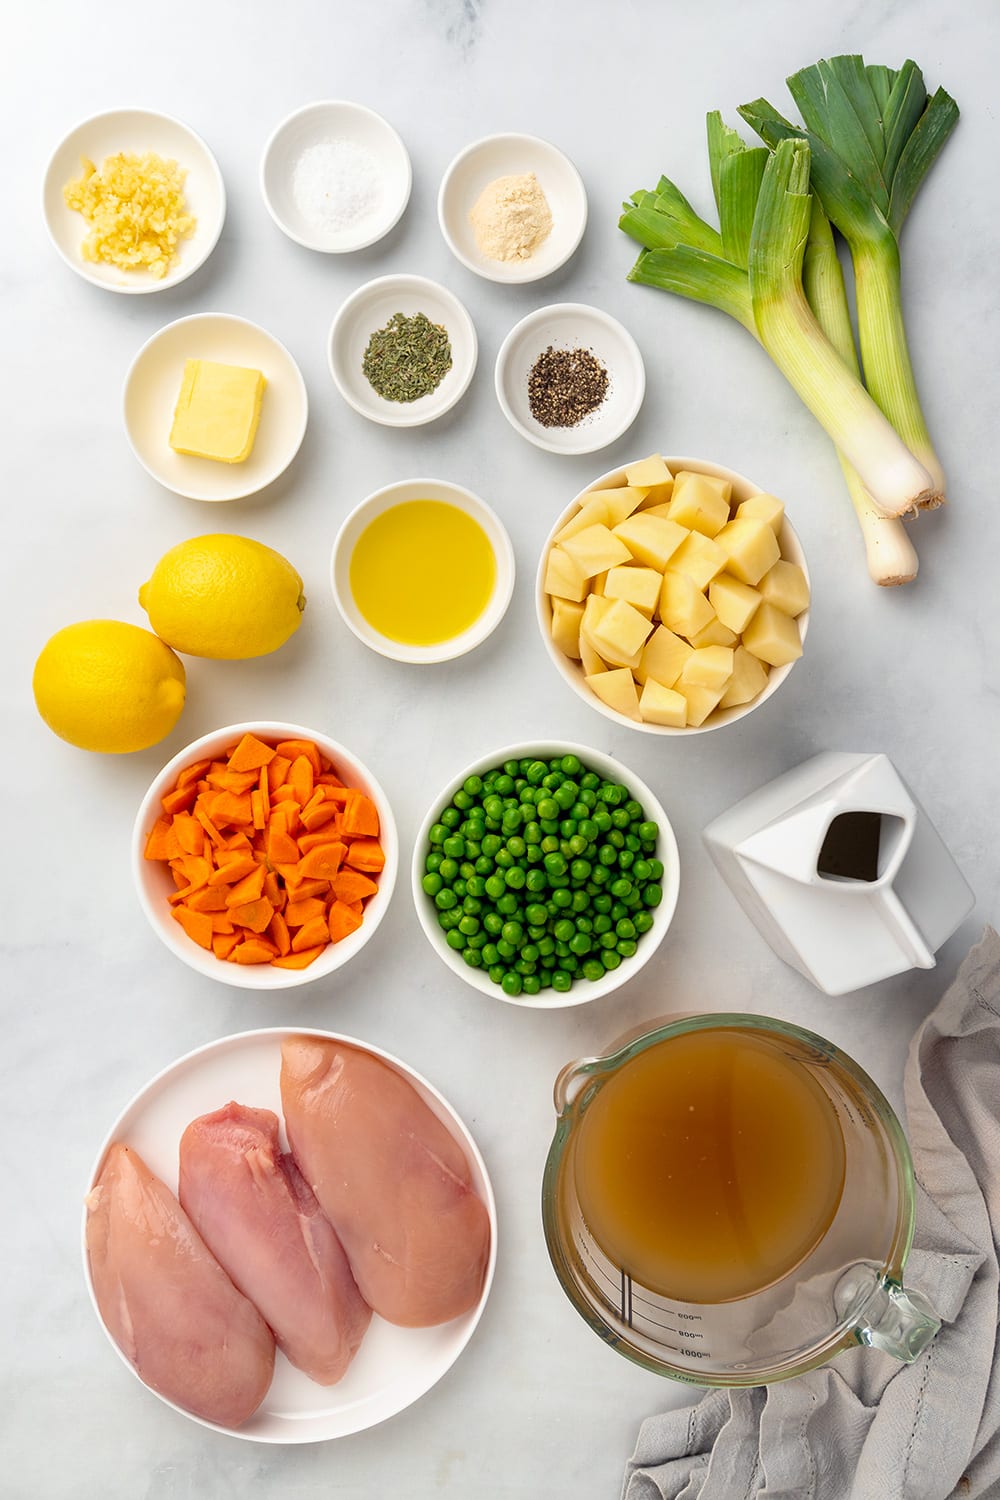 Ingredients for Instant Pot Chicken Stew With Leek, Carrots & Peas